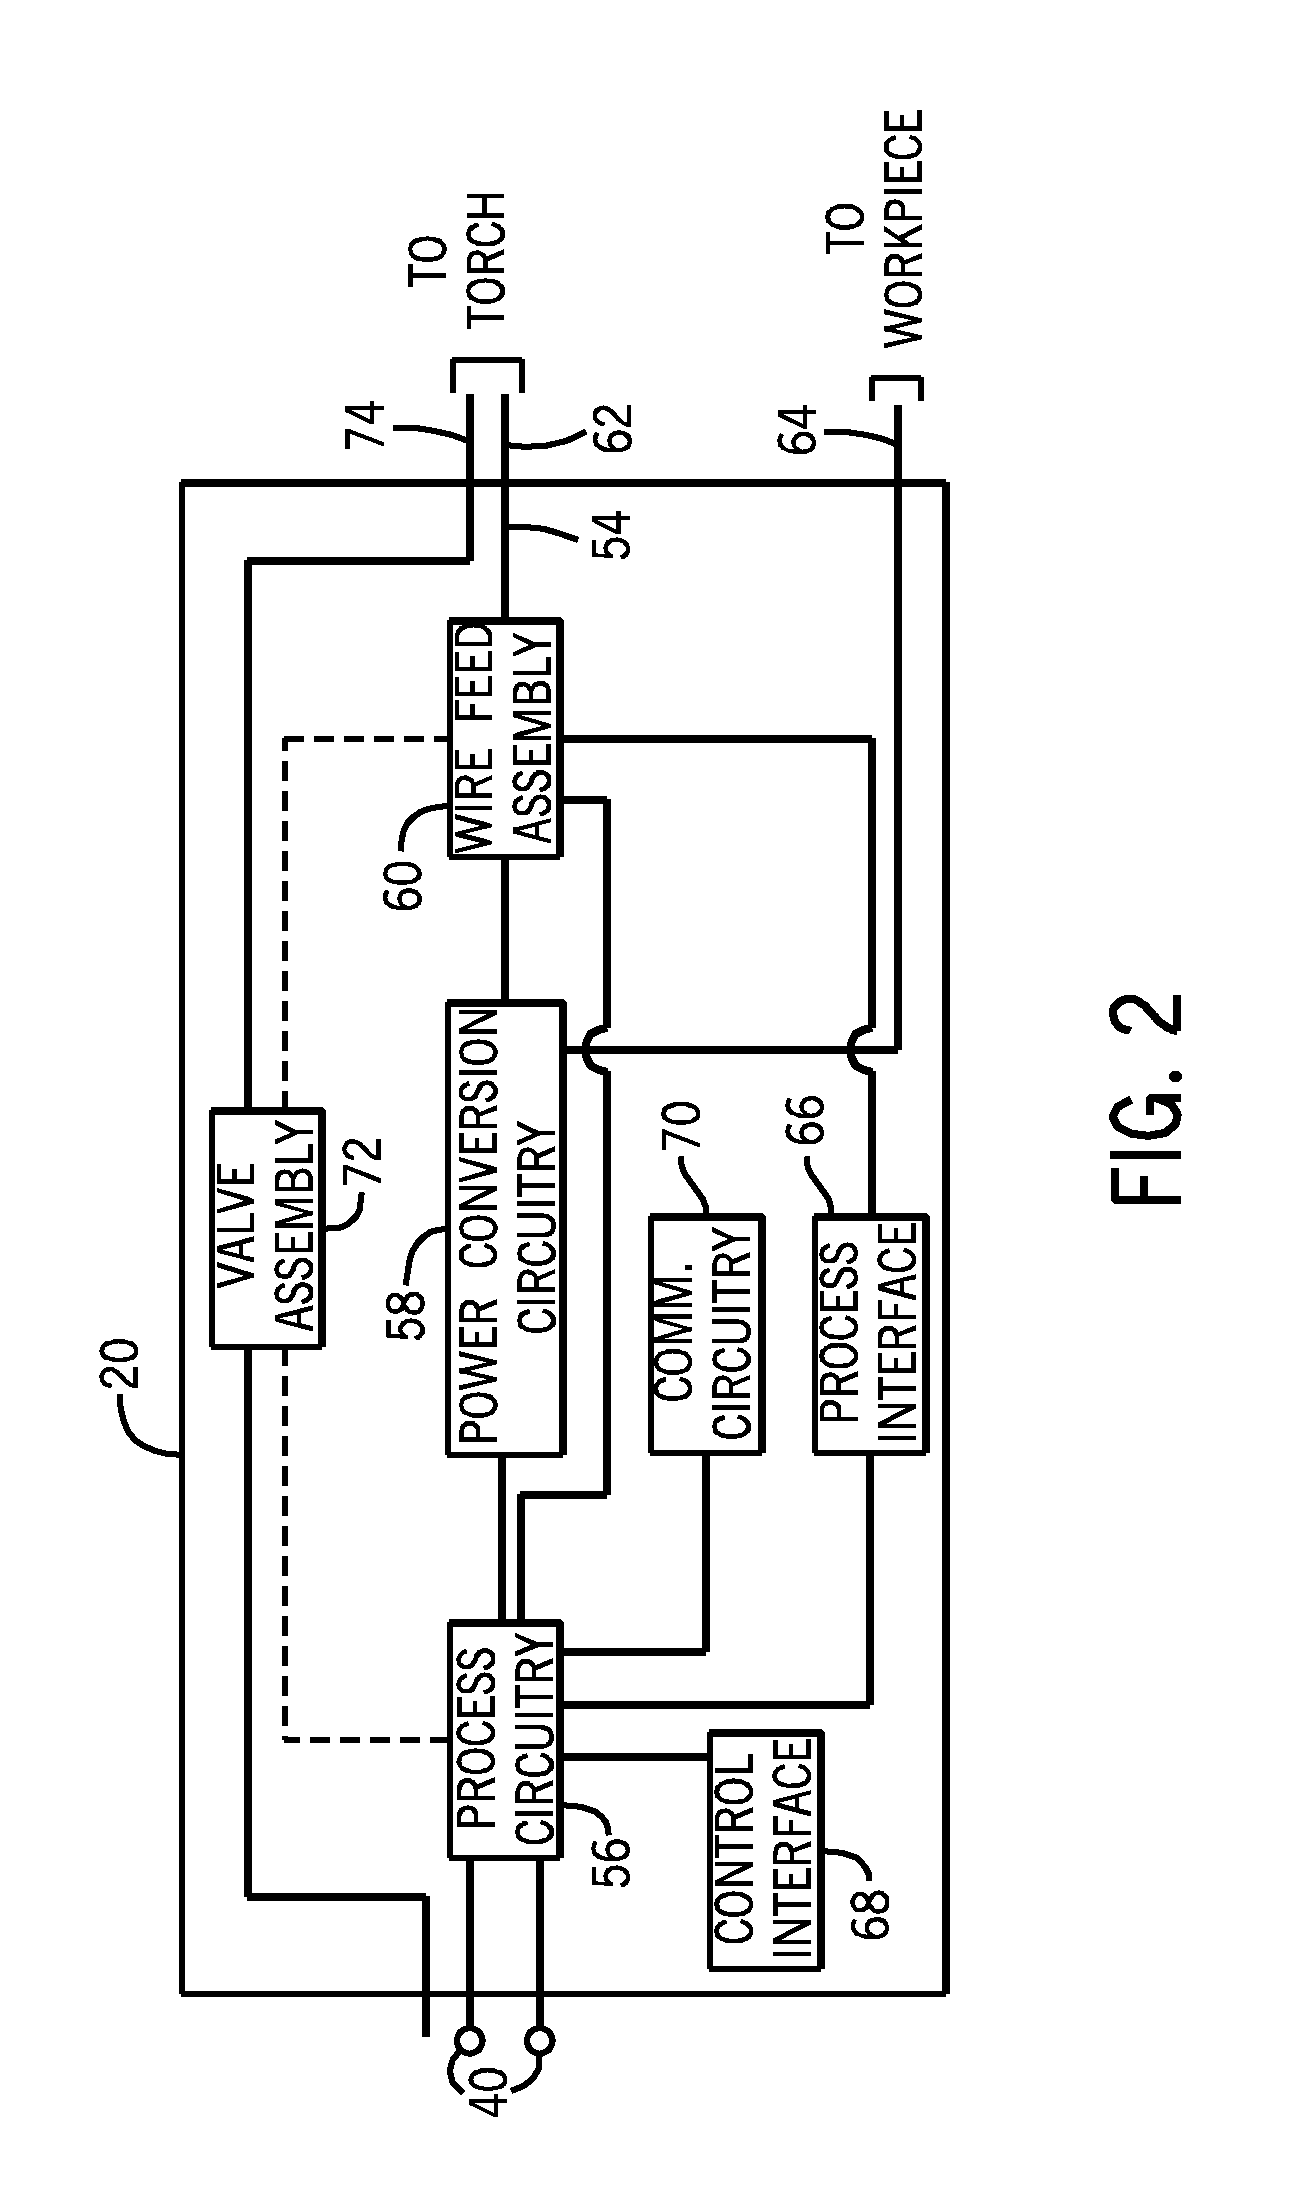 Controlled waveform welding wire feeder system and method